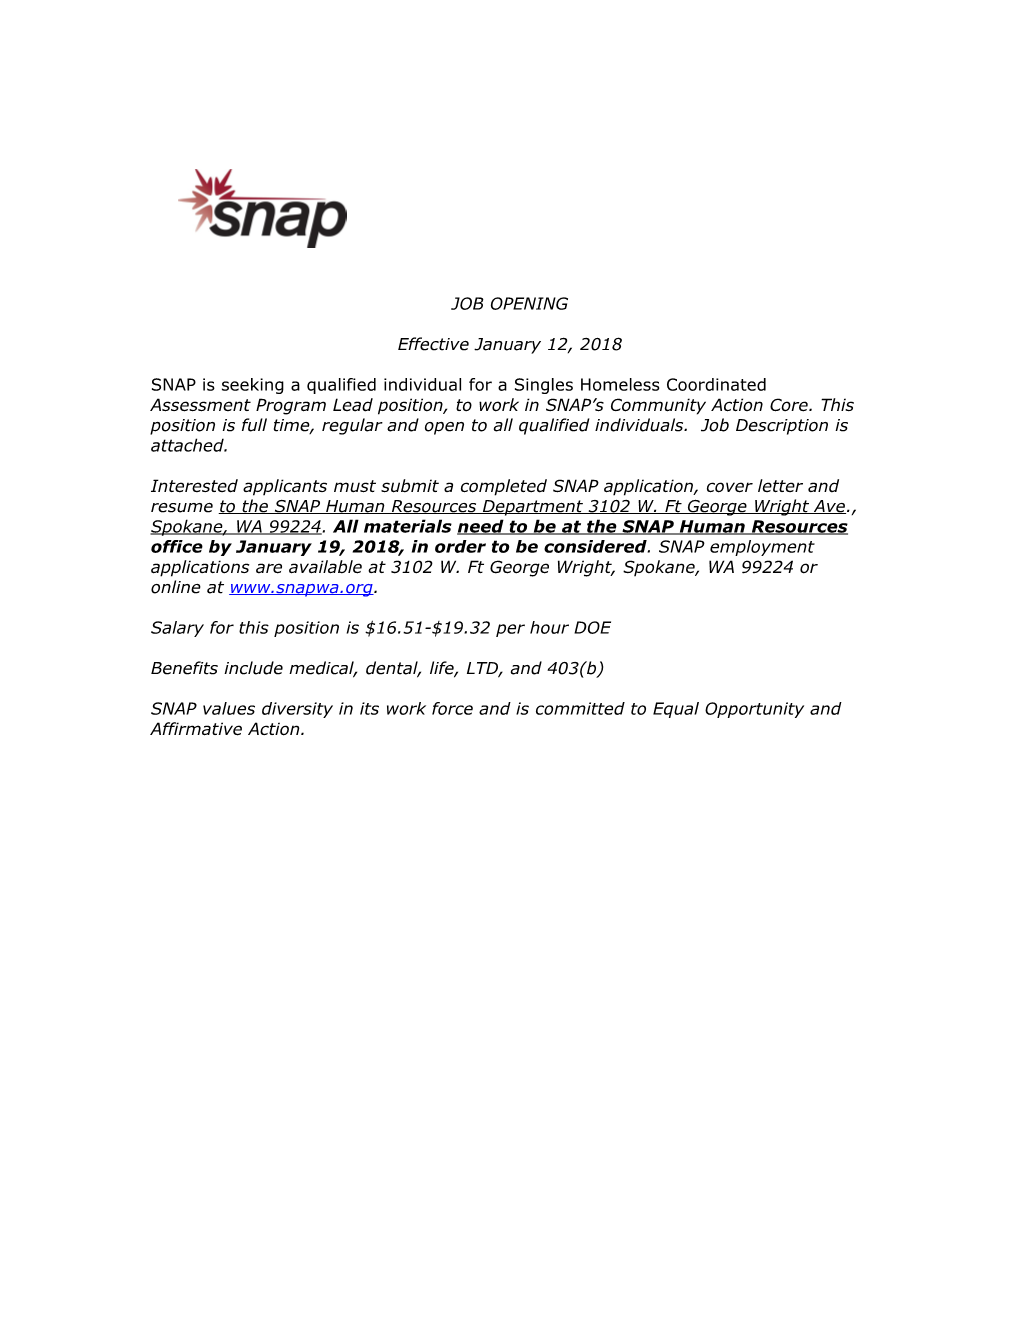 SNAP Is Seekinga Qualified Individual for Asingles Homeless Coordinated